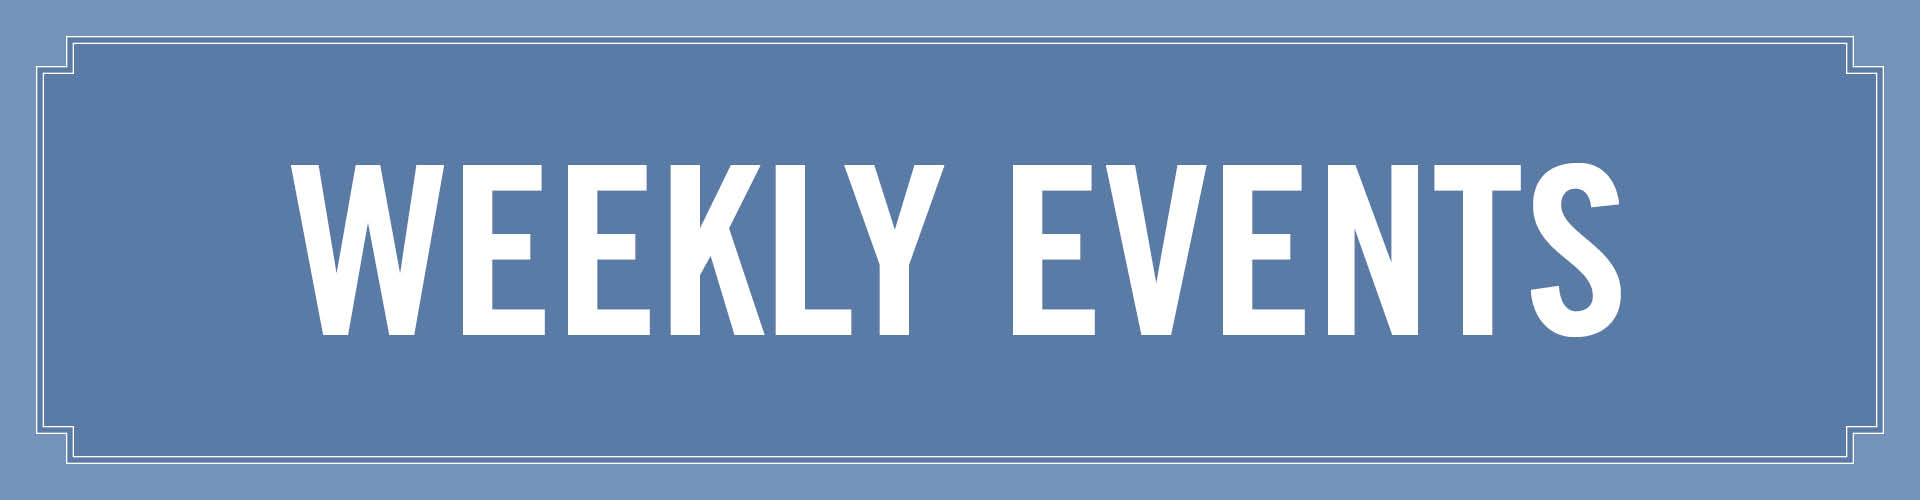 Weekly Events in London | The Gable